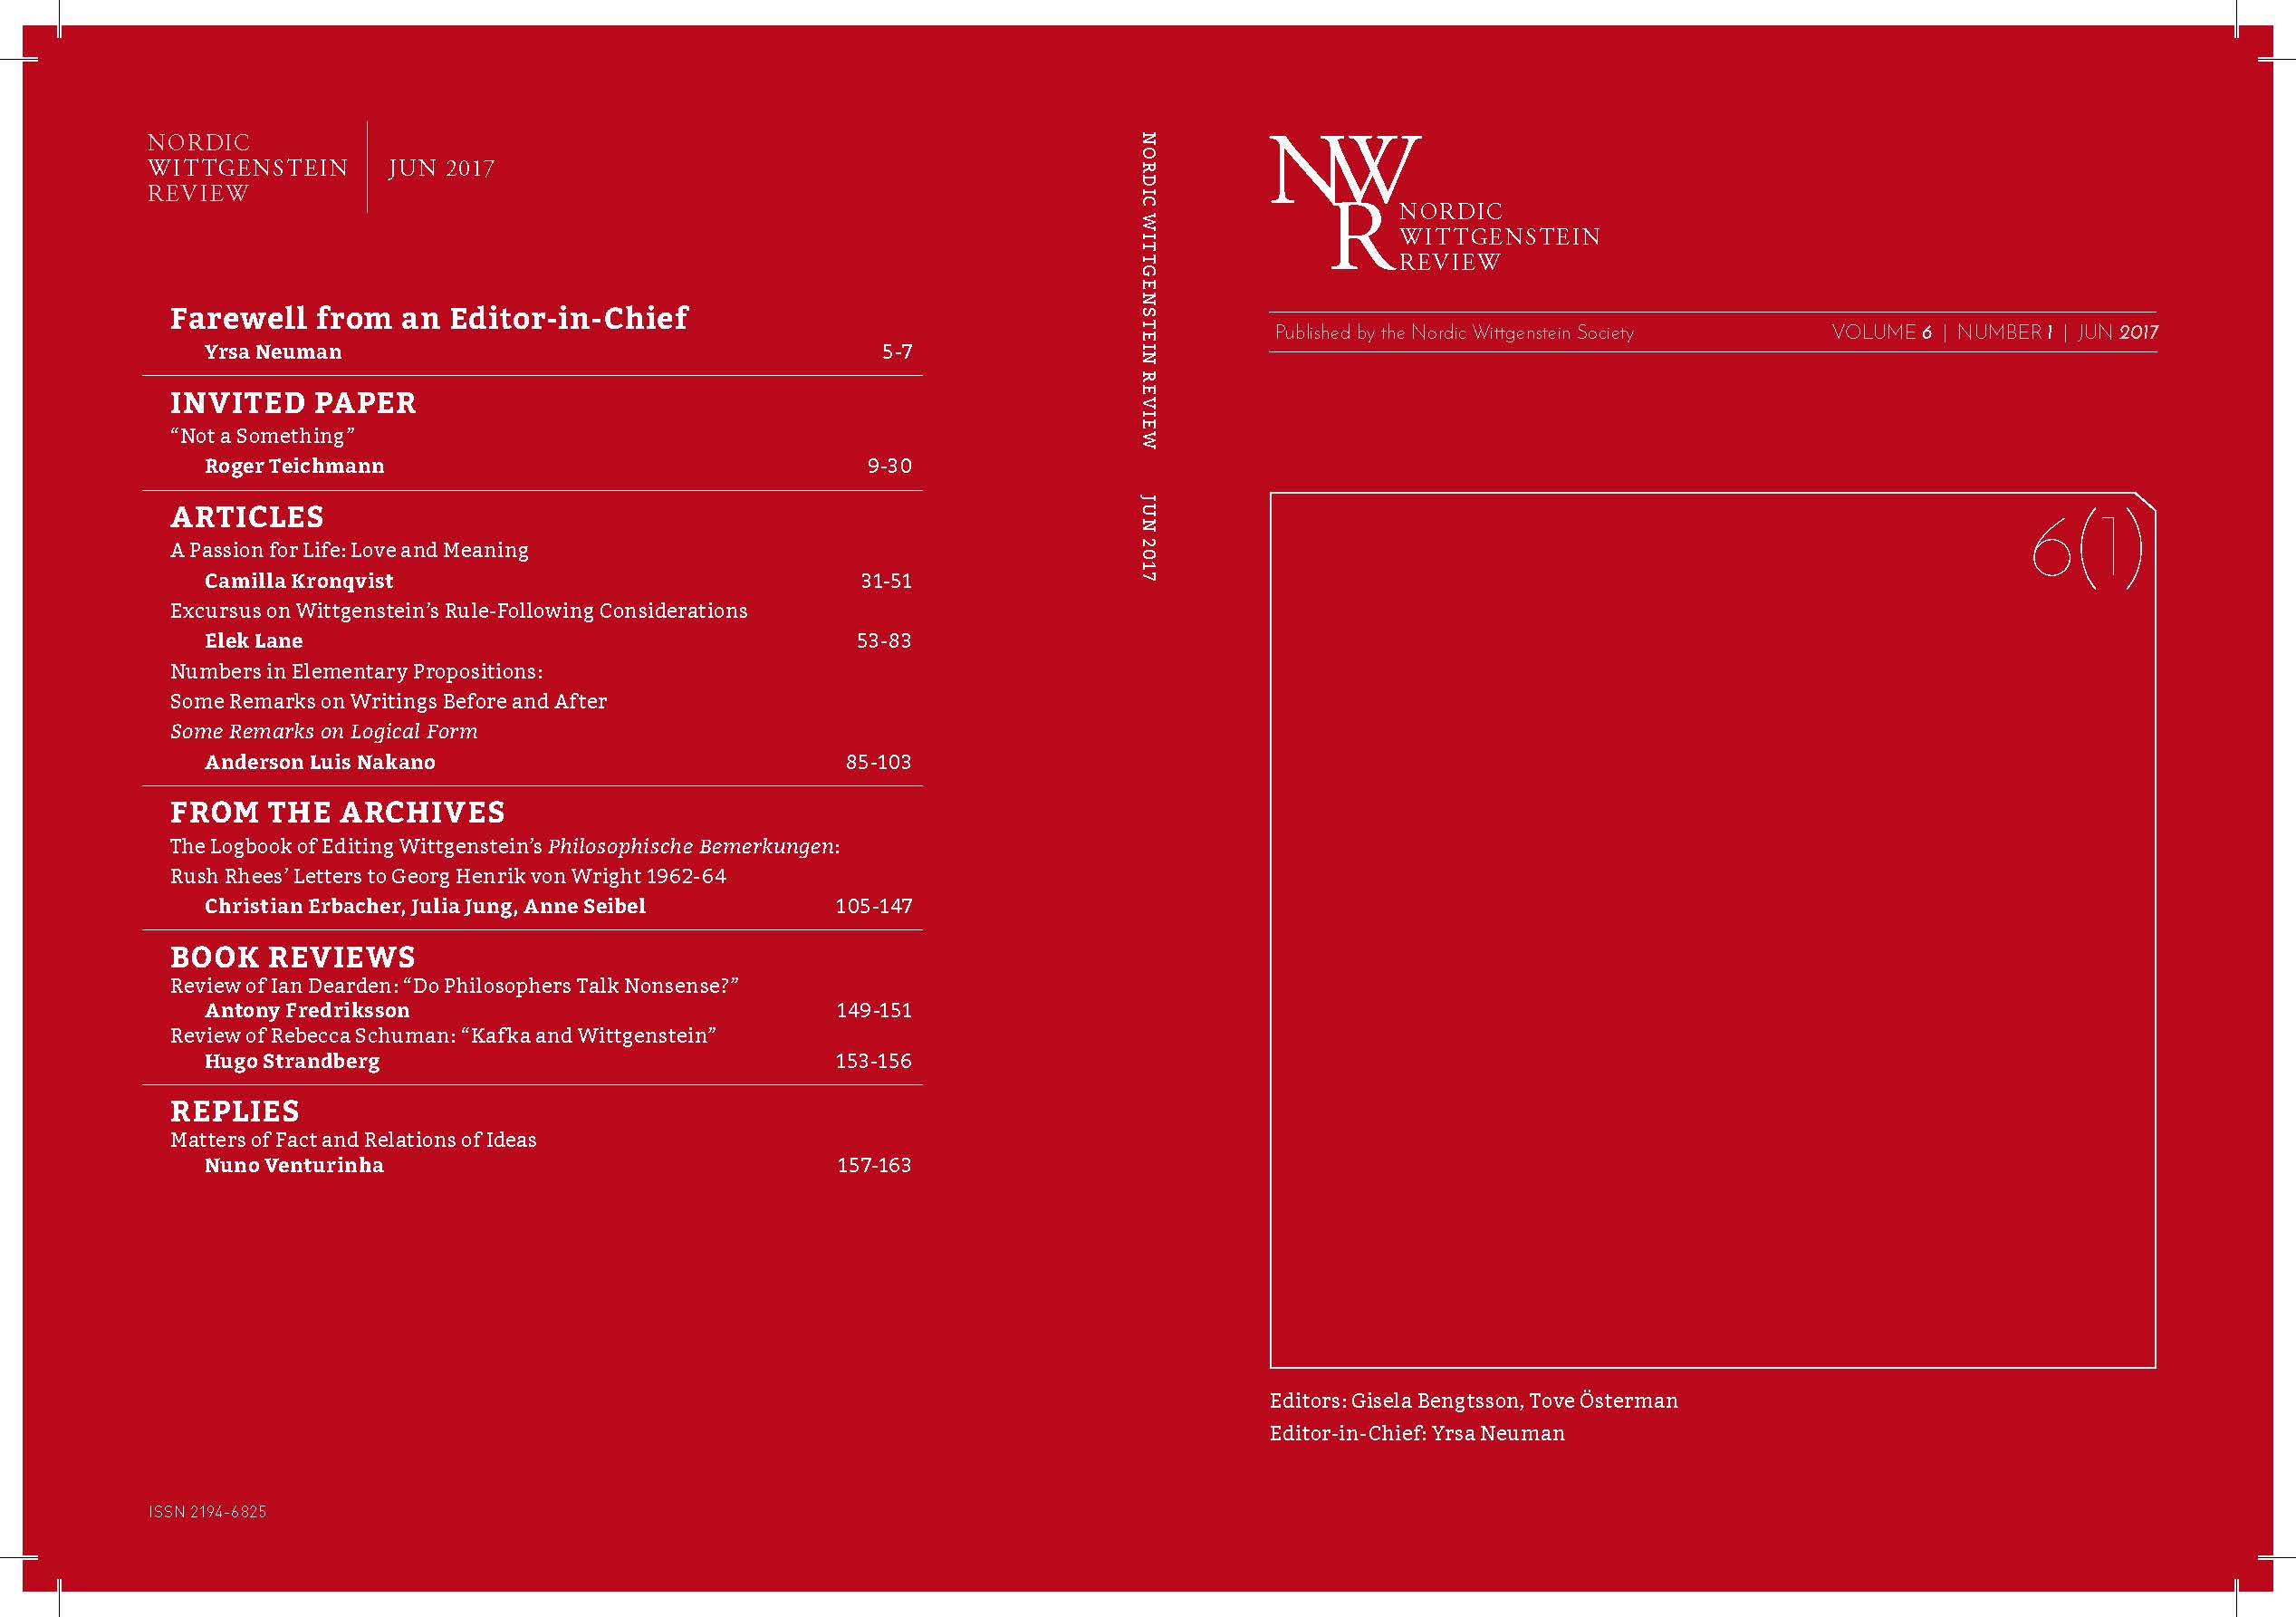 					View Vol. 6 No. 1 (2017): Volume 6 / Number 1 (June 2017) Volume 7 / Number 2 (December 2018) Y. Neuman, G. Bengtsson, T. Österman (eds.); A. Pichler (from the Archives); M. Gustafsson (book reviews)
				